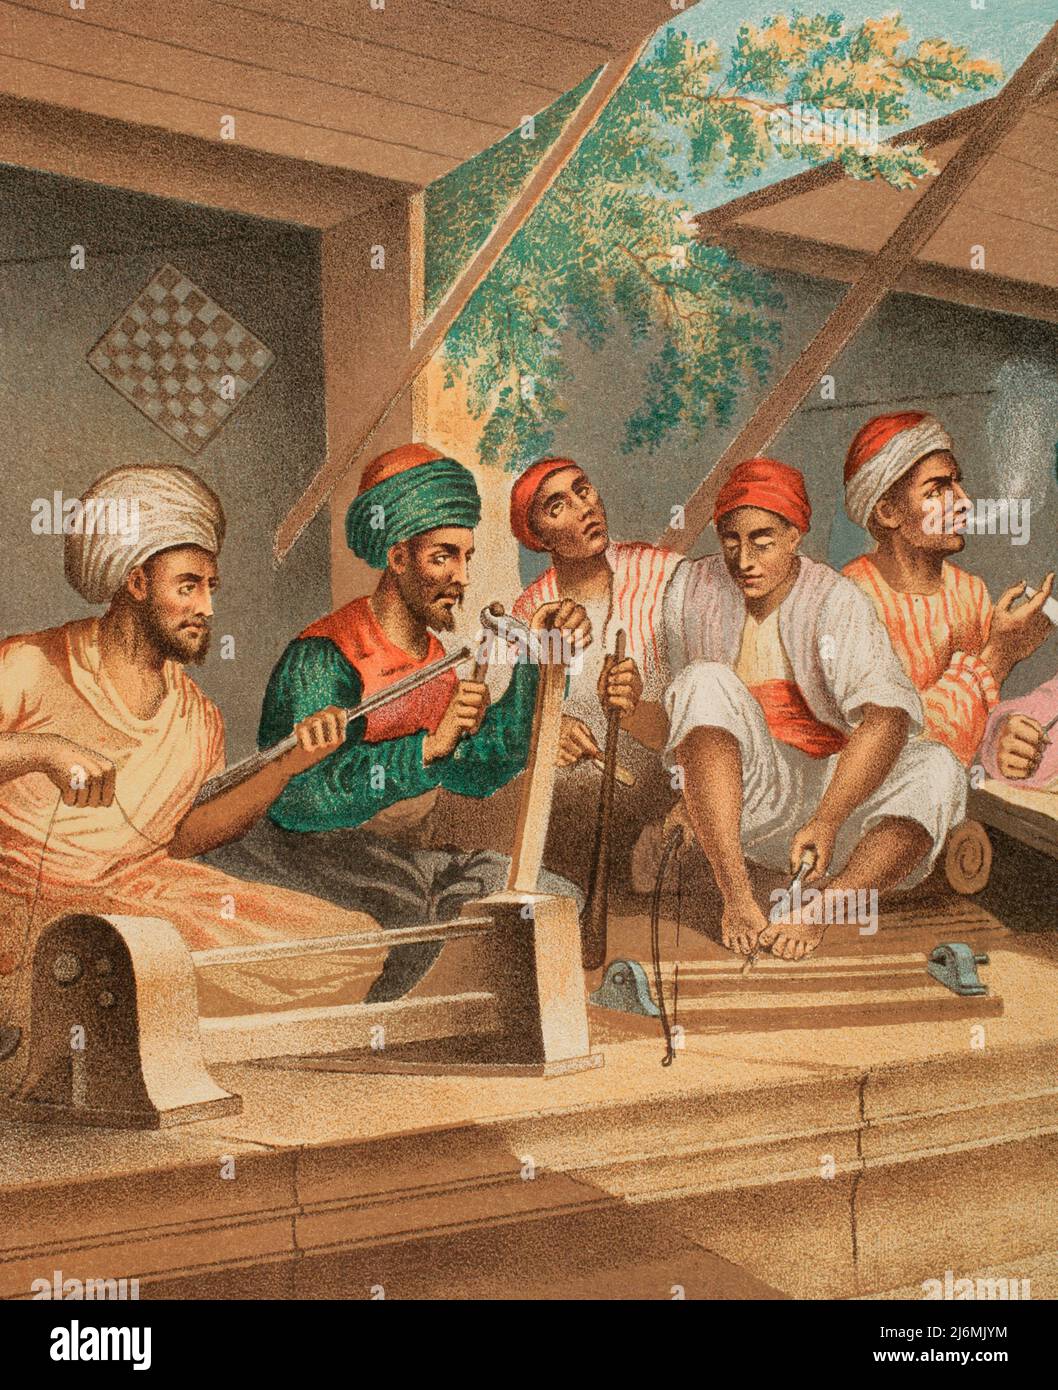 Turkish craftsmen in Constantinople. From left to right: passementerie maker, pipe maker and wood turners. Chromolithography. Illustration by José Acevedo. Lithograph by José Maria Mateu. Detail. "Viaje a Oriente", 1878. Stock Photo